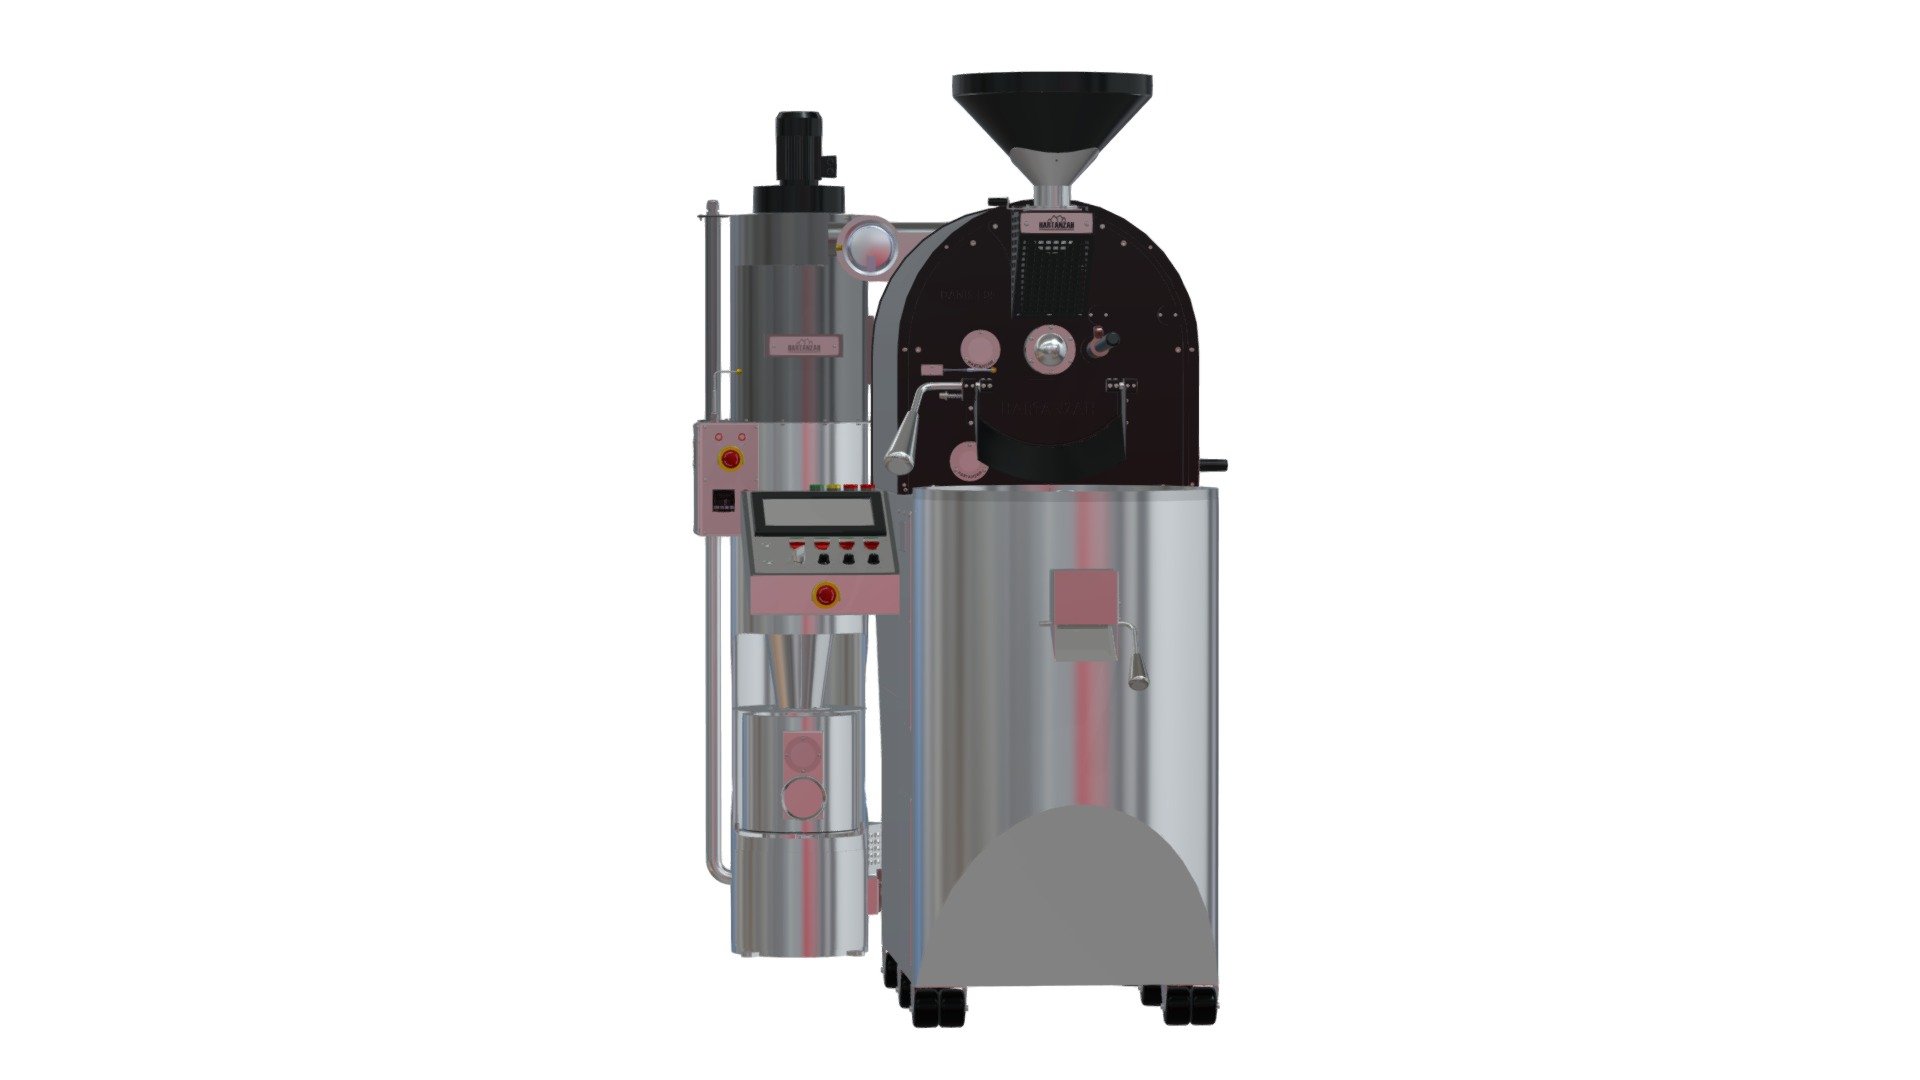 HARTANZAH DANISH 05 - 5 KG GAS AUTOMATIC COFFEE ROASTER

5 kg automatic shop coffee roaster. Built using the highest quality steel, cast iron combined with stainless steel material make Danish 05 become heavy-duty build coffee roaster.

Thermal and mechanism stability makes the continuous roasting process much easier with consistent results. Danish 05 is a perfect choice for roasting of high-quality specialty coffee.

Click this link to find more detail about Hartanzah Danish 05 - Hartanzah Danish 05 - 5 Kg Gas Coffee Roaster - 3D model by Hartanzah 3d model